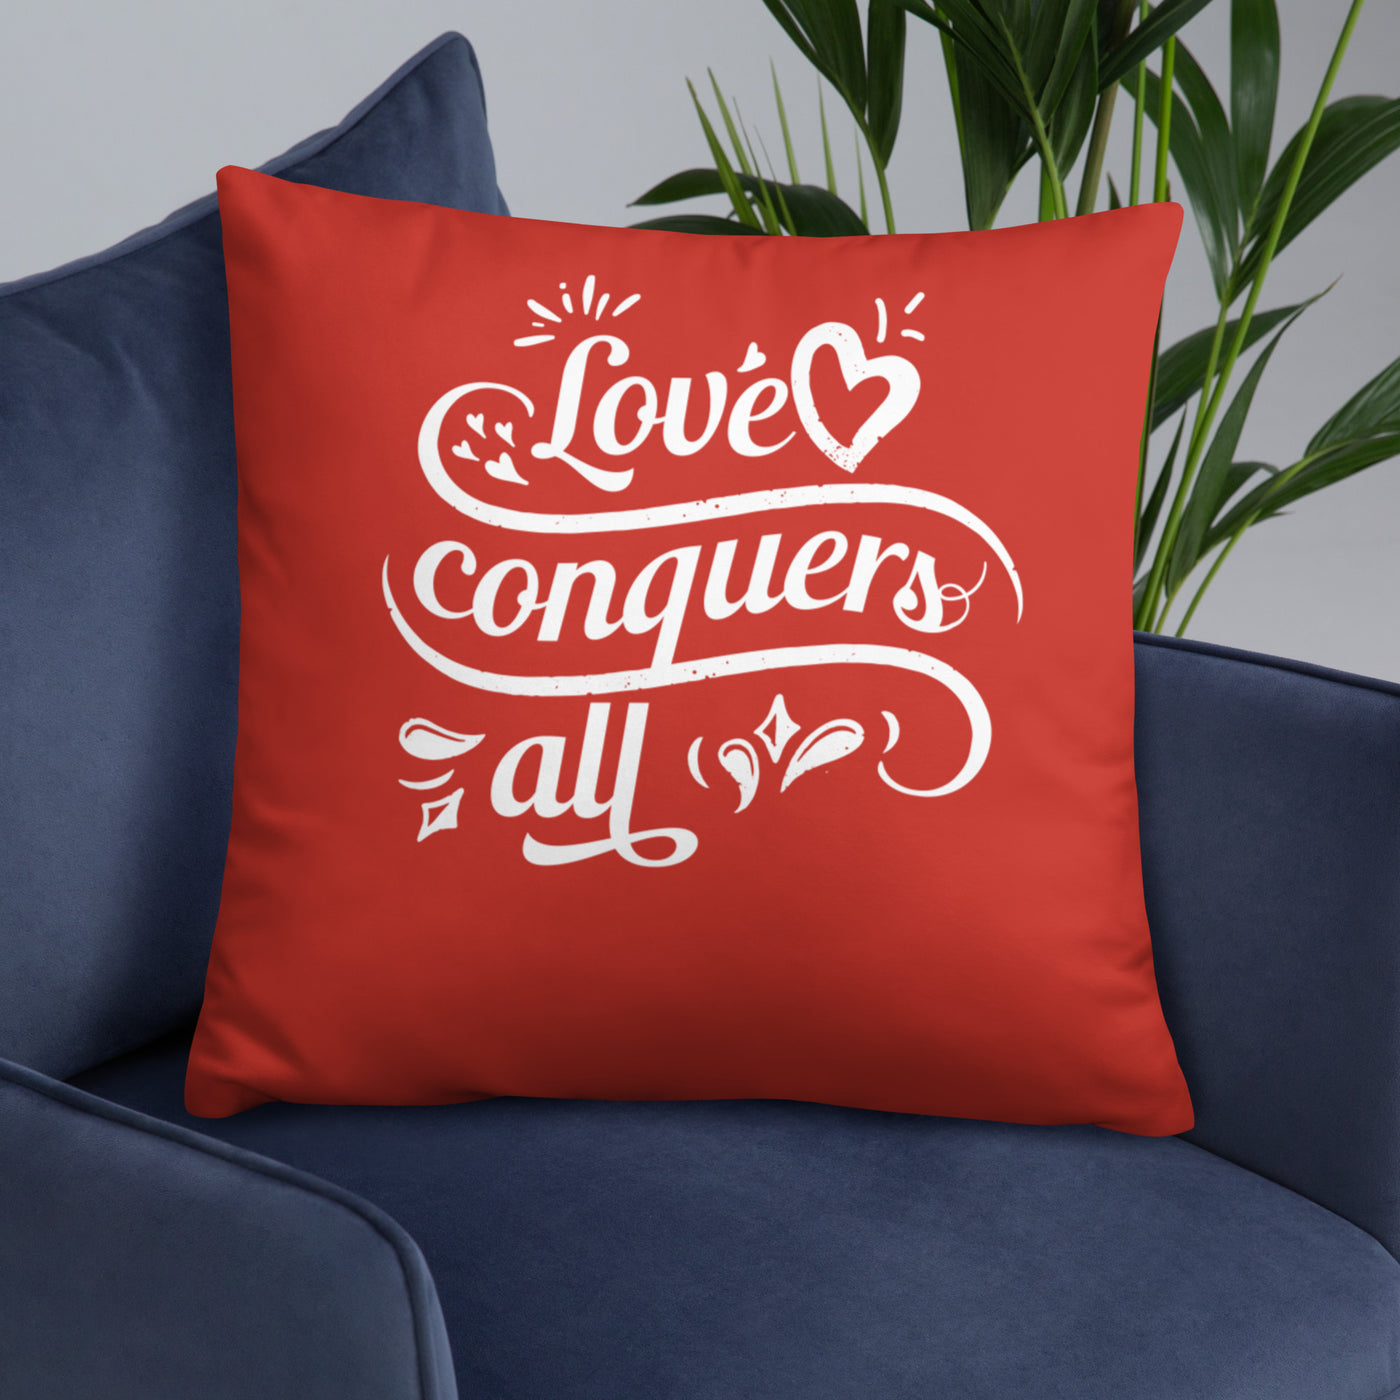 F&H Christian Love Conquers All Throw Pillow